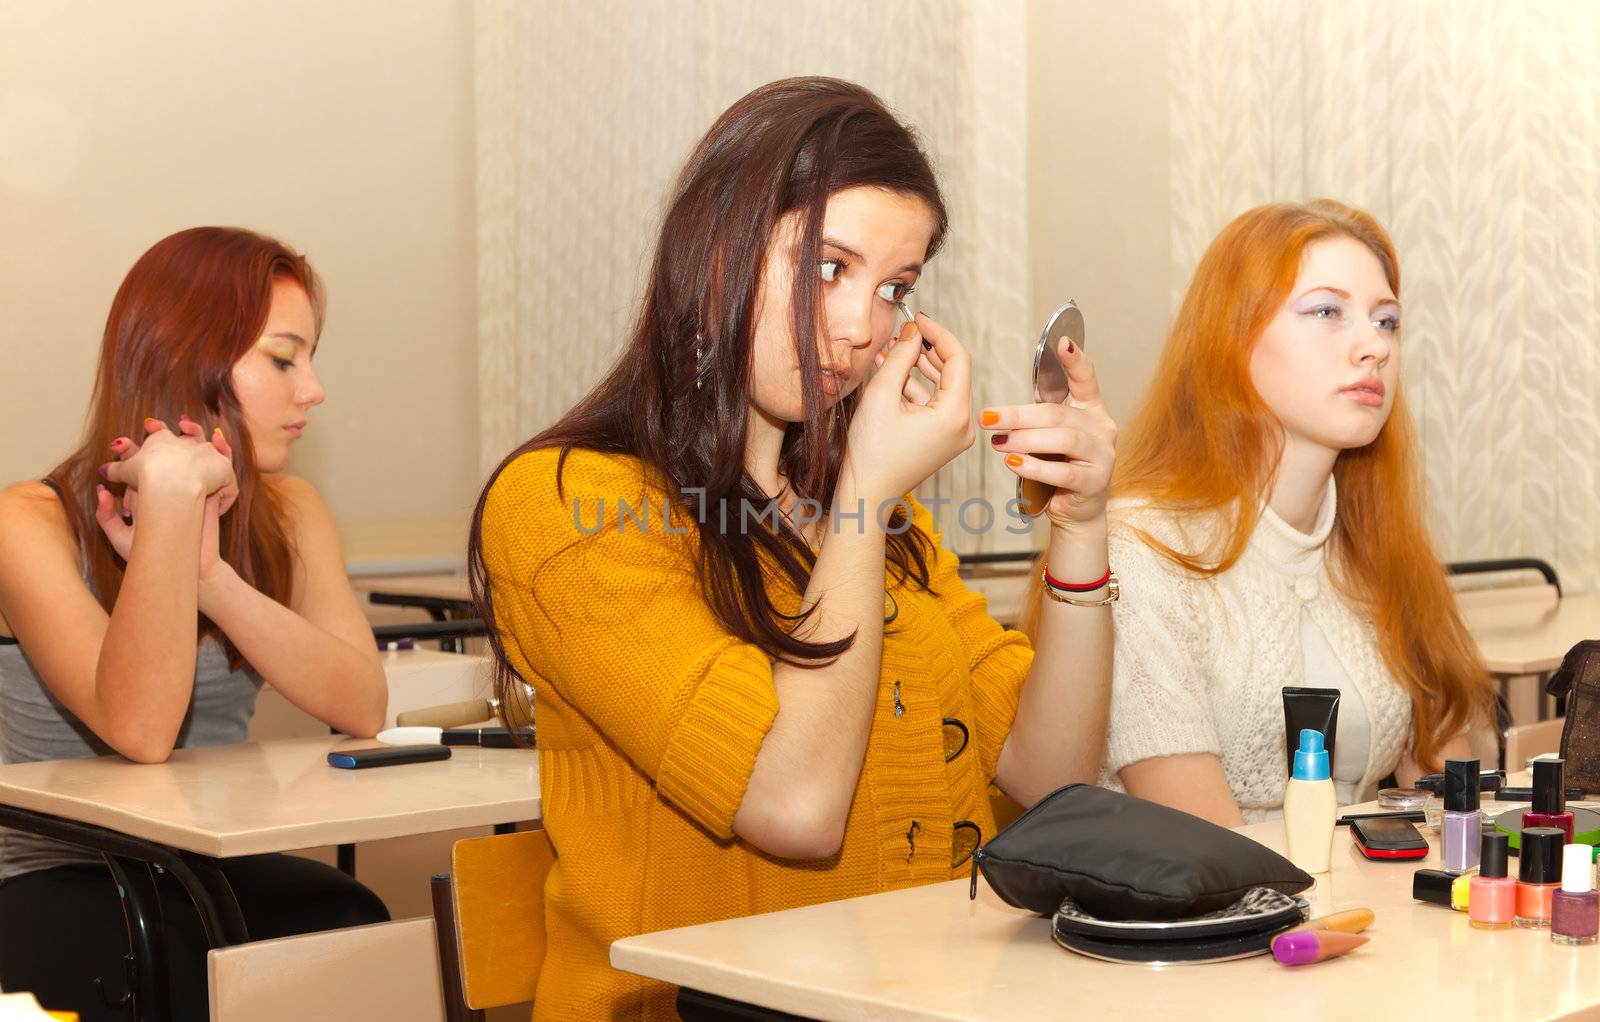 girls in the classroom during recess apply makeup